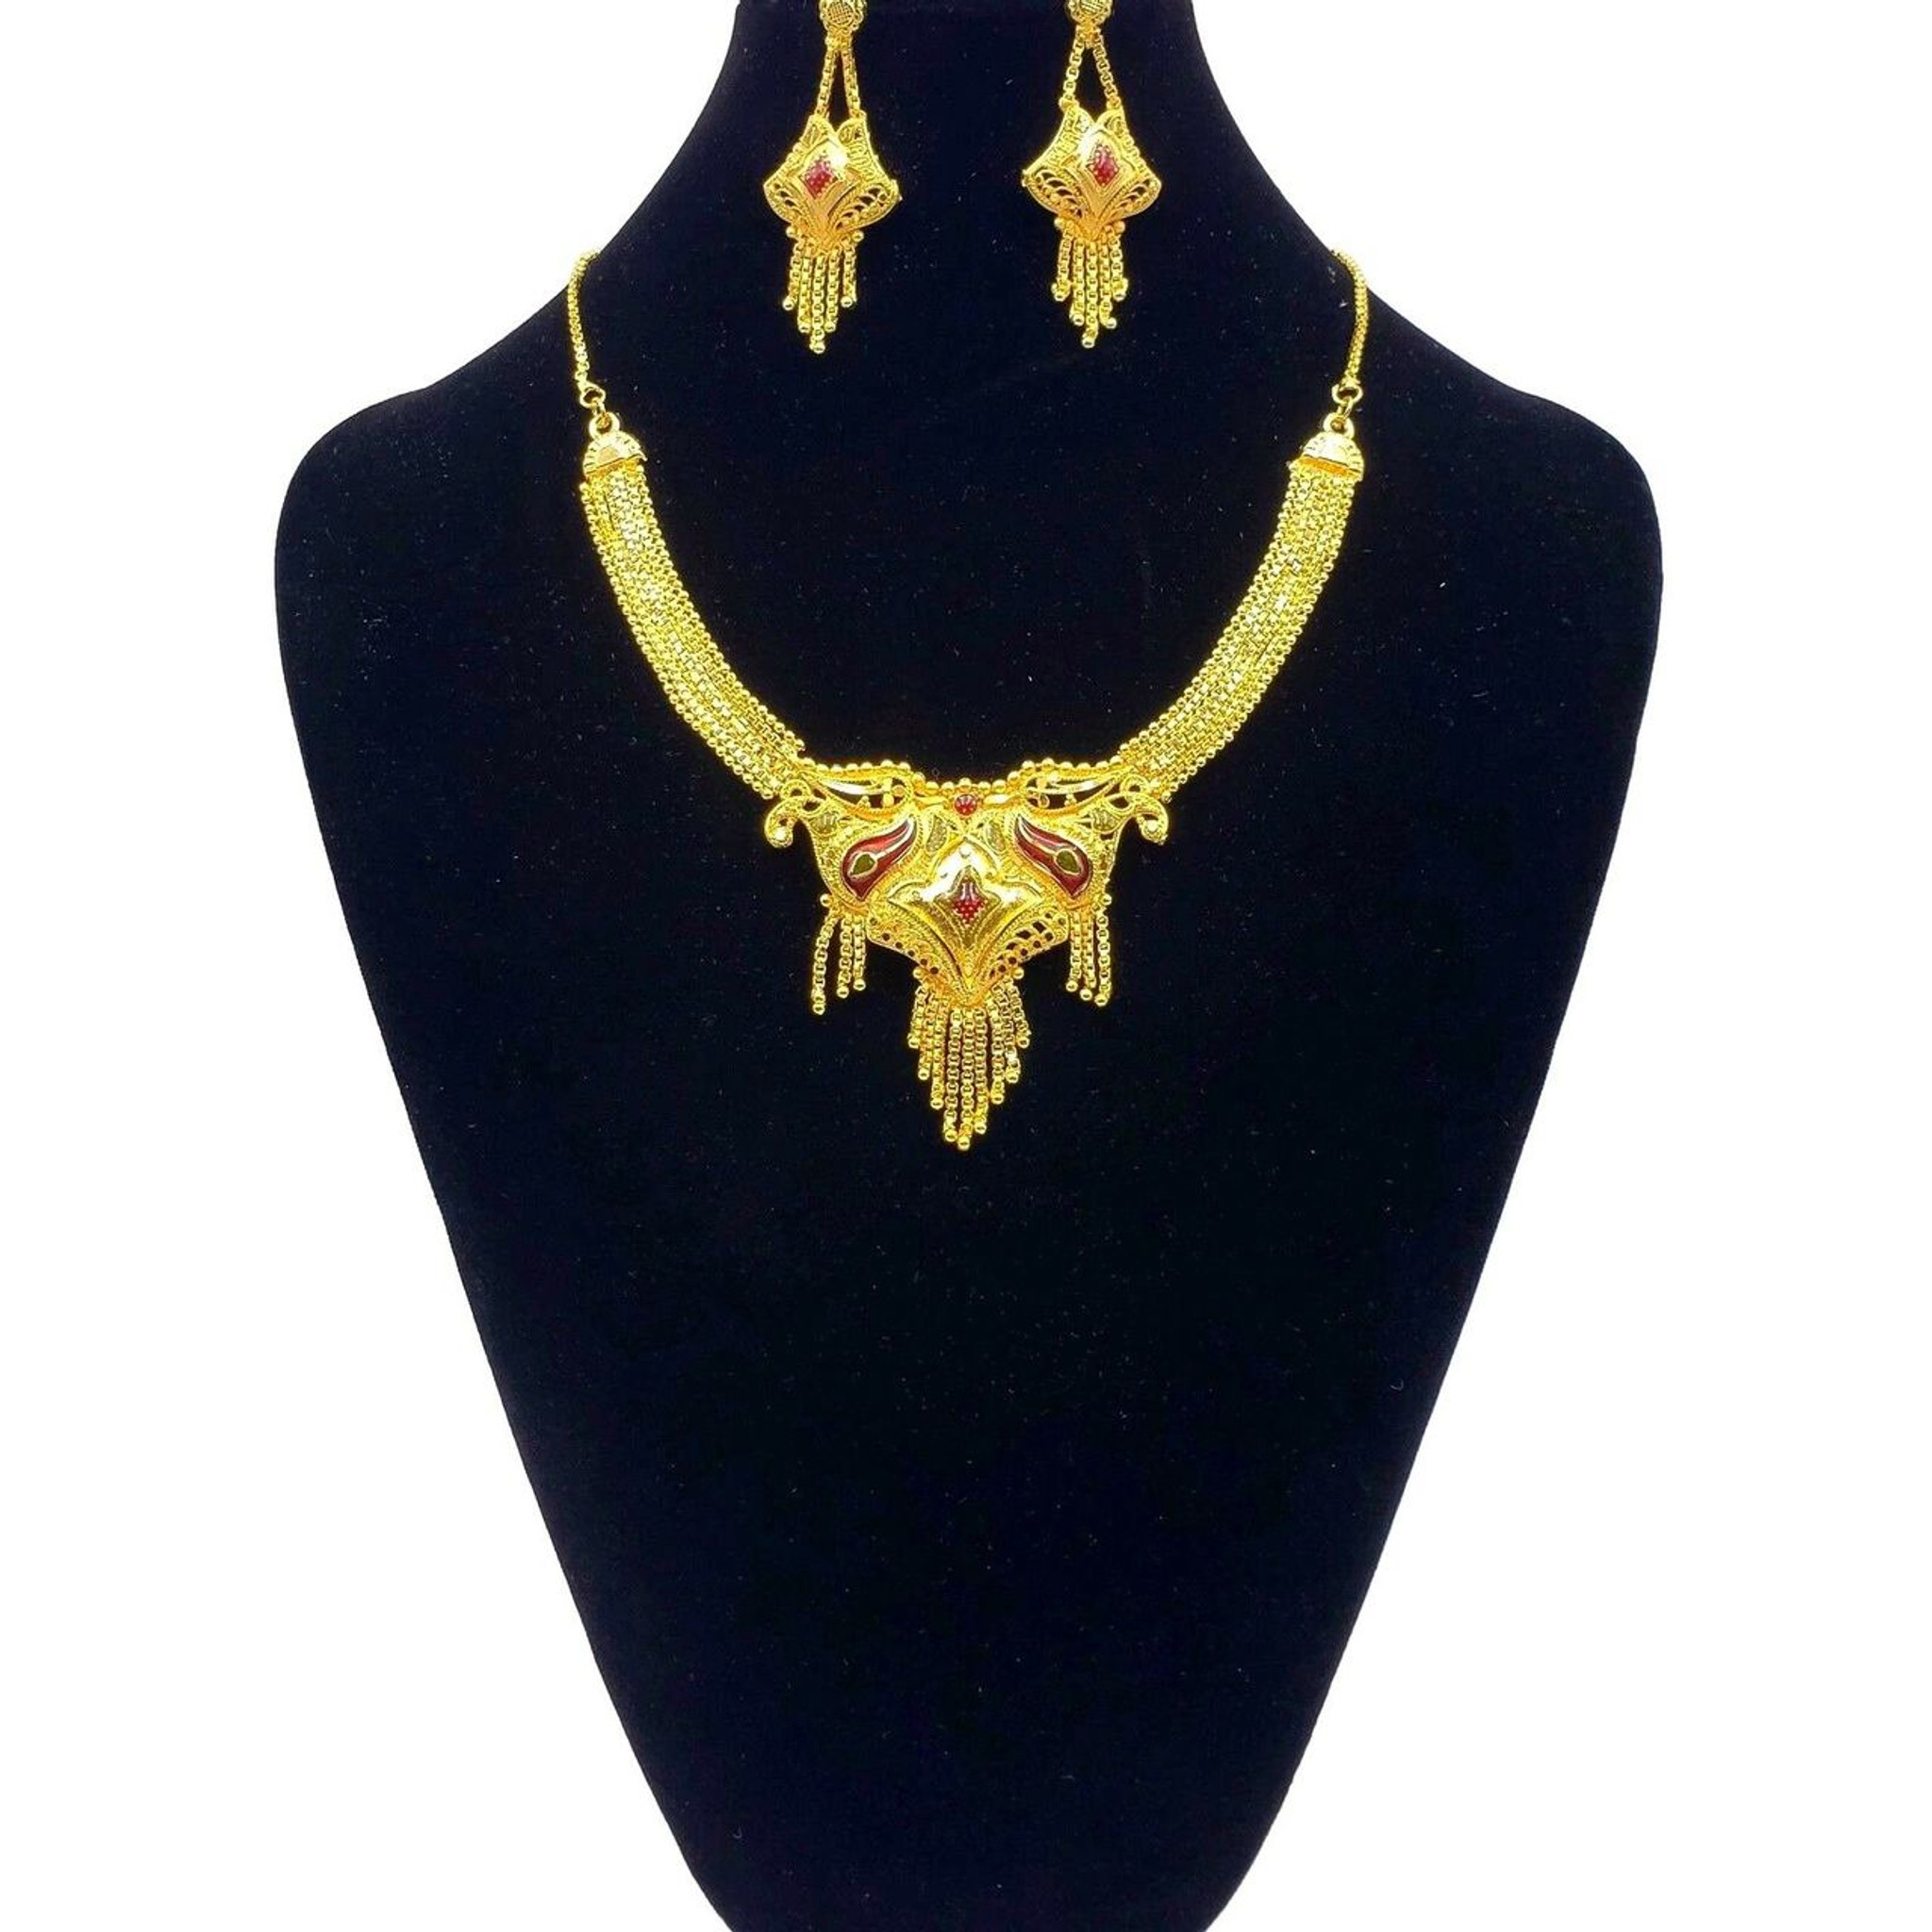 Fashion Indian 18K Gold Plated Bollywood Necklace Wedding Jewelry Earrings 1520D